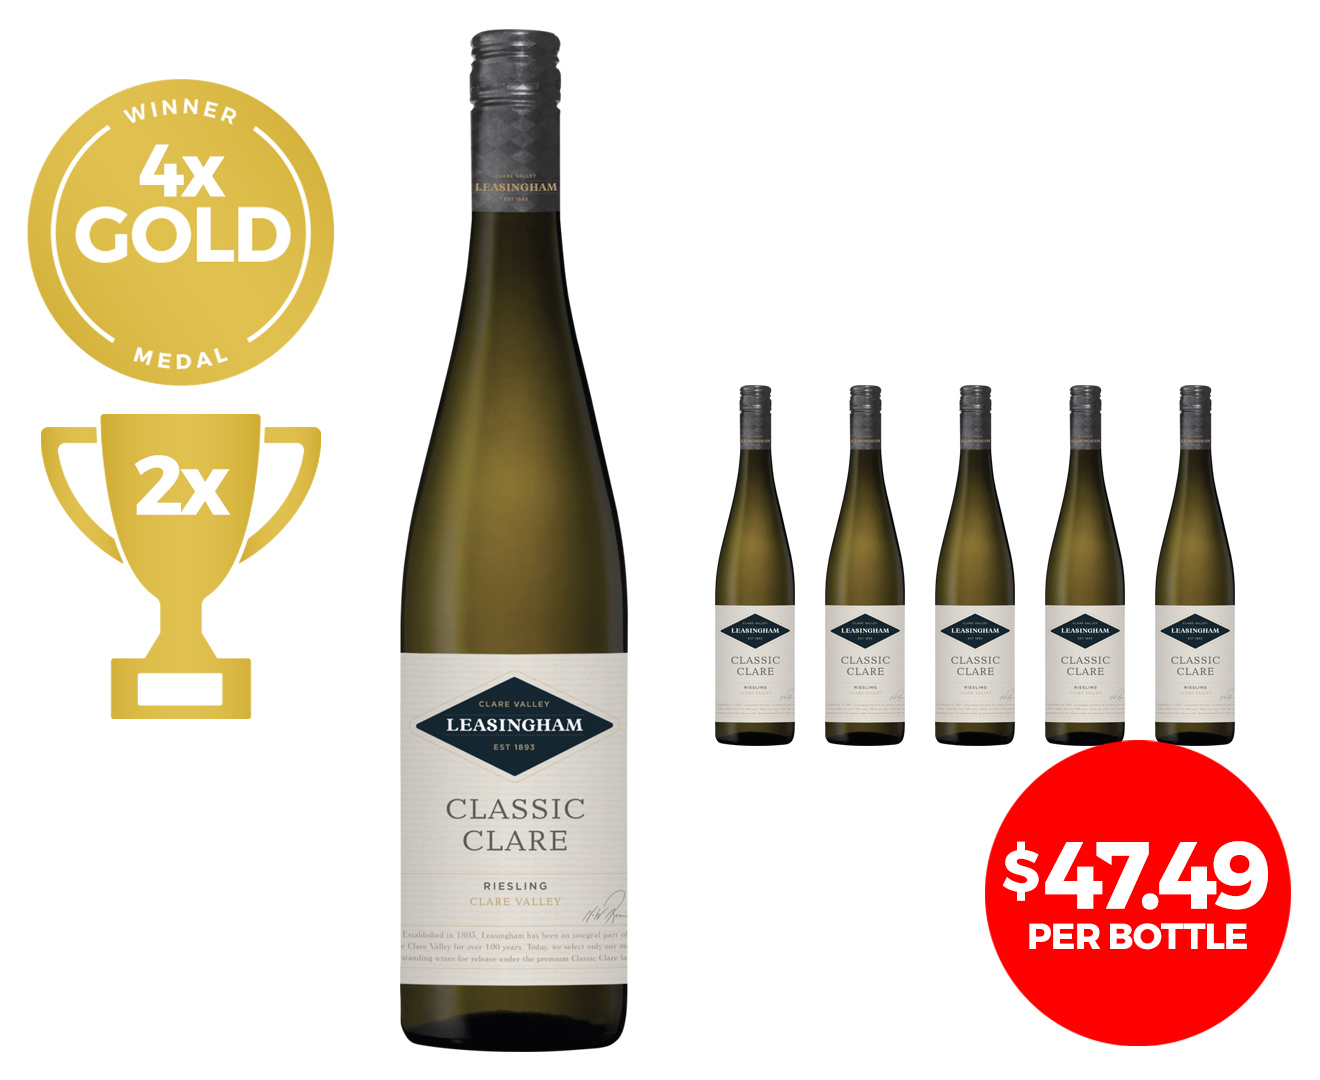 6 x Leasingham Clare Valley Riesling 2009 750mL